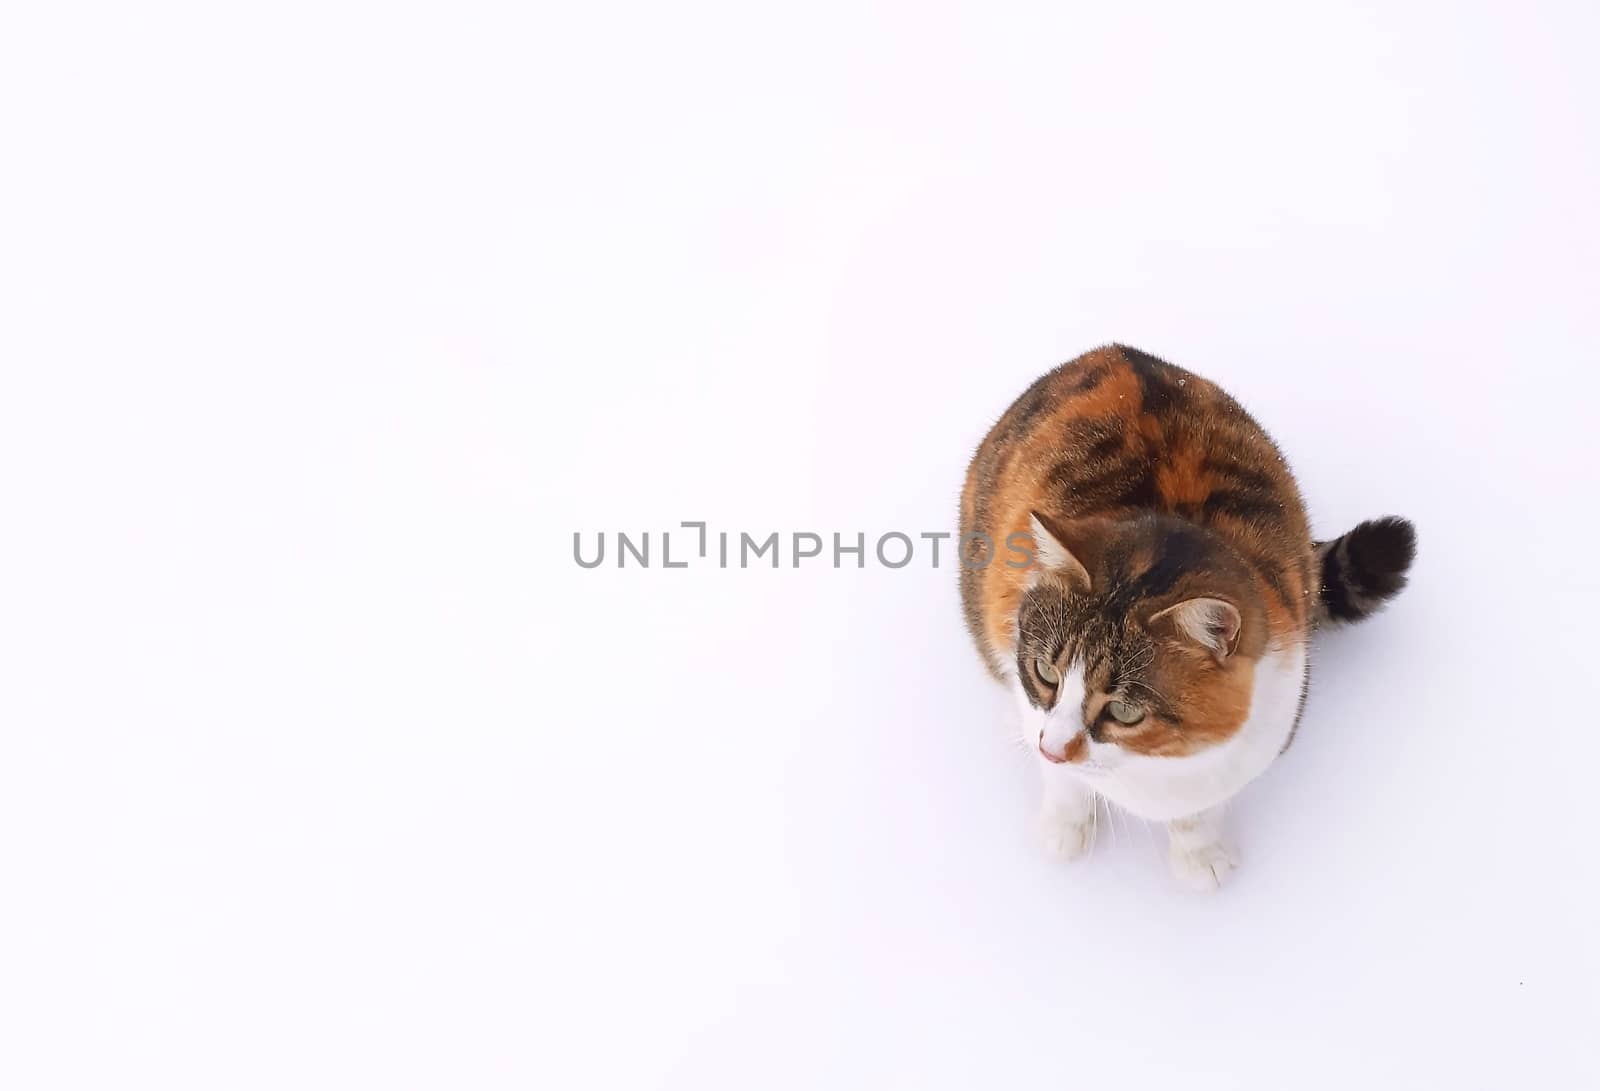 A beautiful cat on a white background.